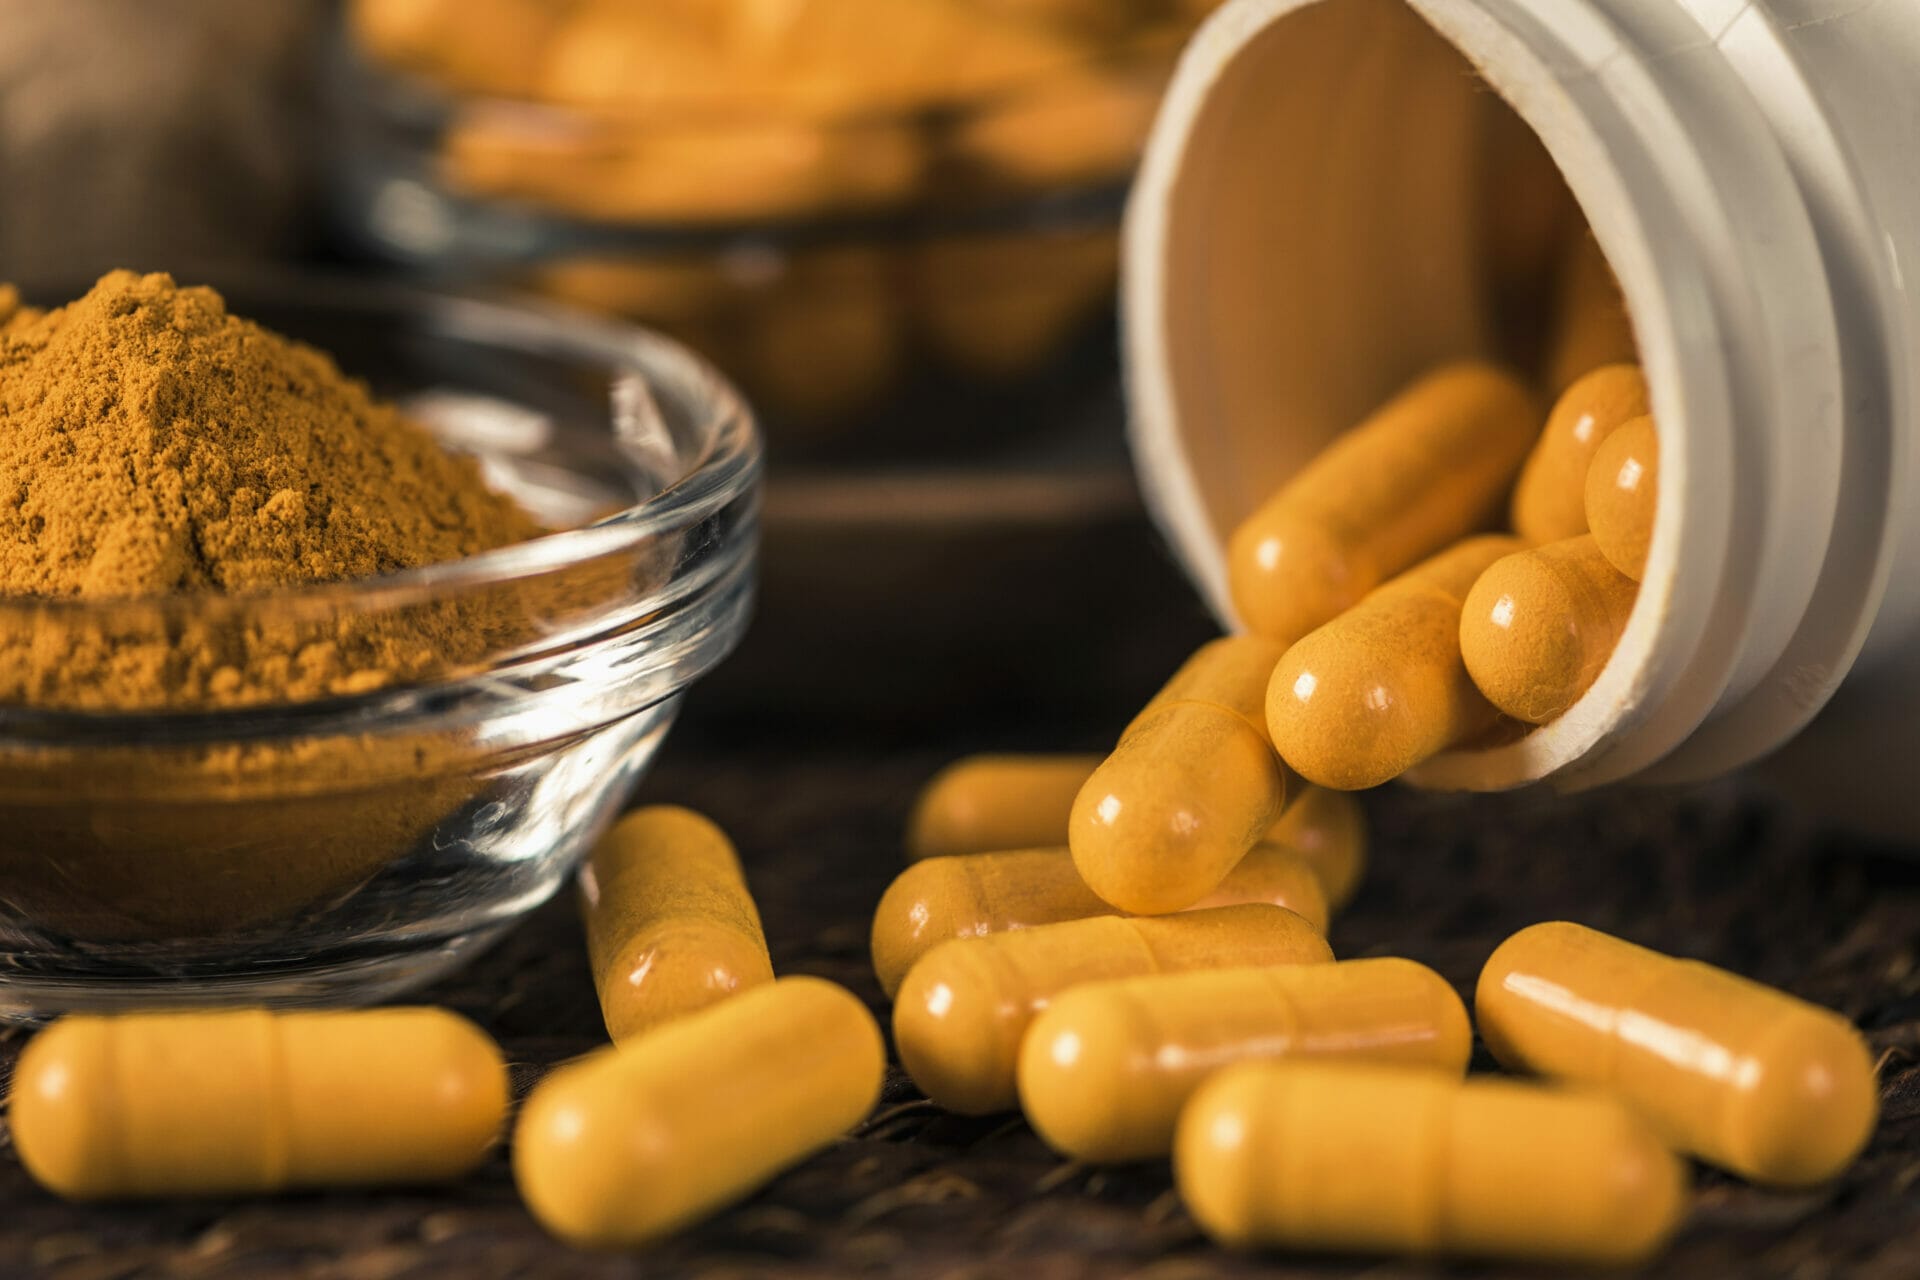 Dietary Supplements & Nutraceuticals: the TRUE Definition & Identity